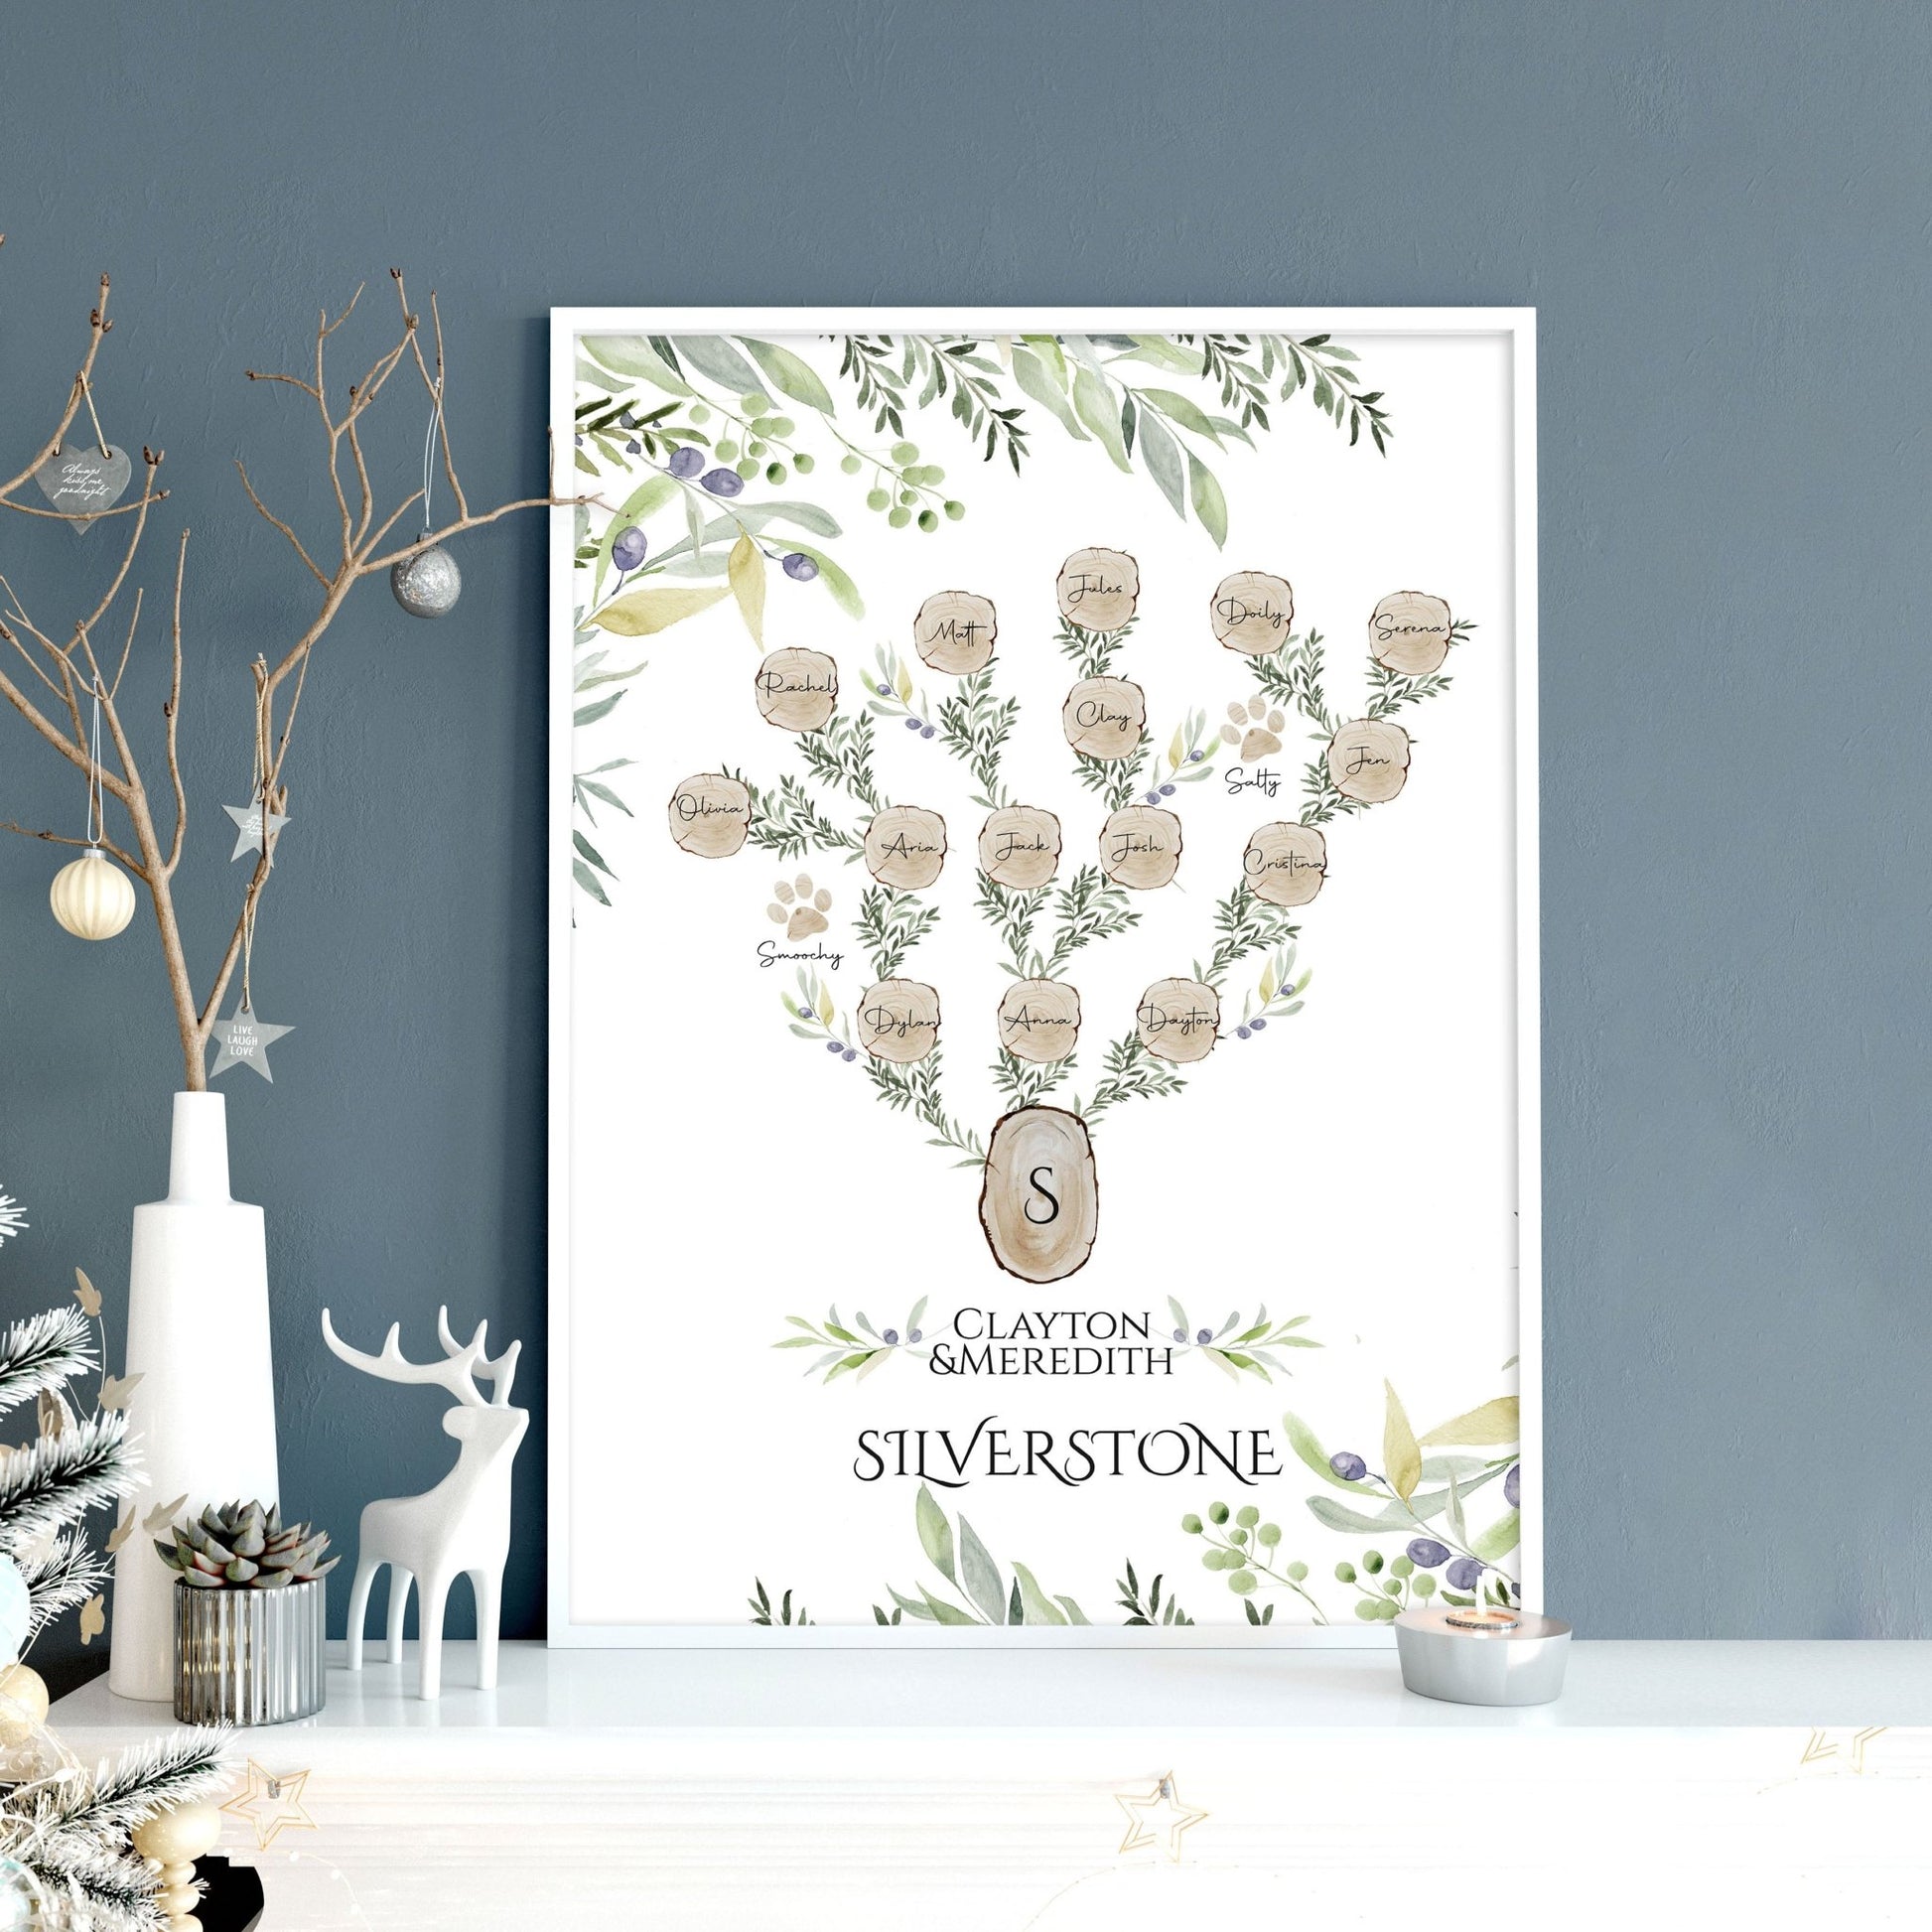 Personalised Family tree for the wall | Wall art Print - About Wall Art